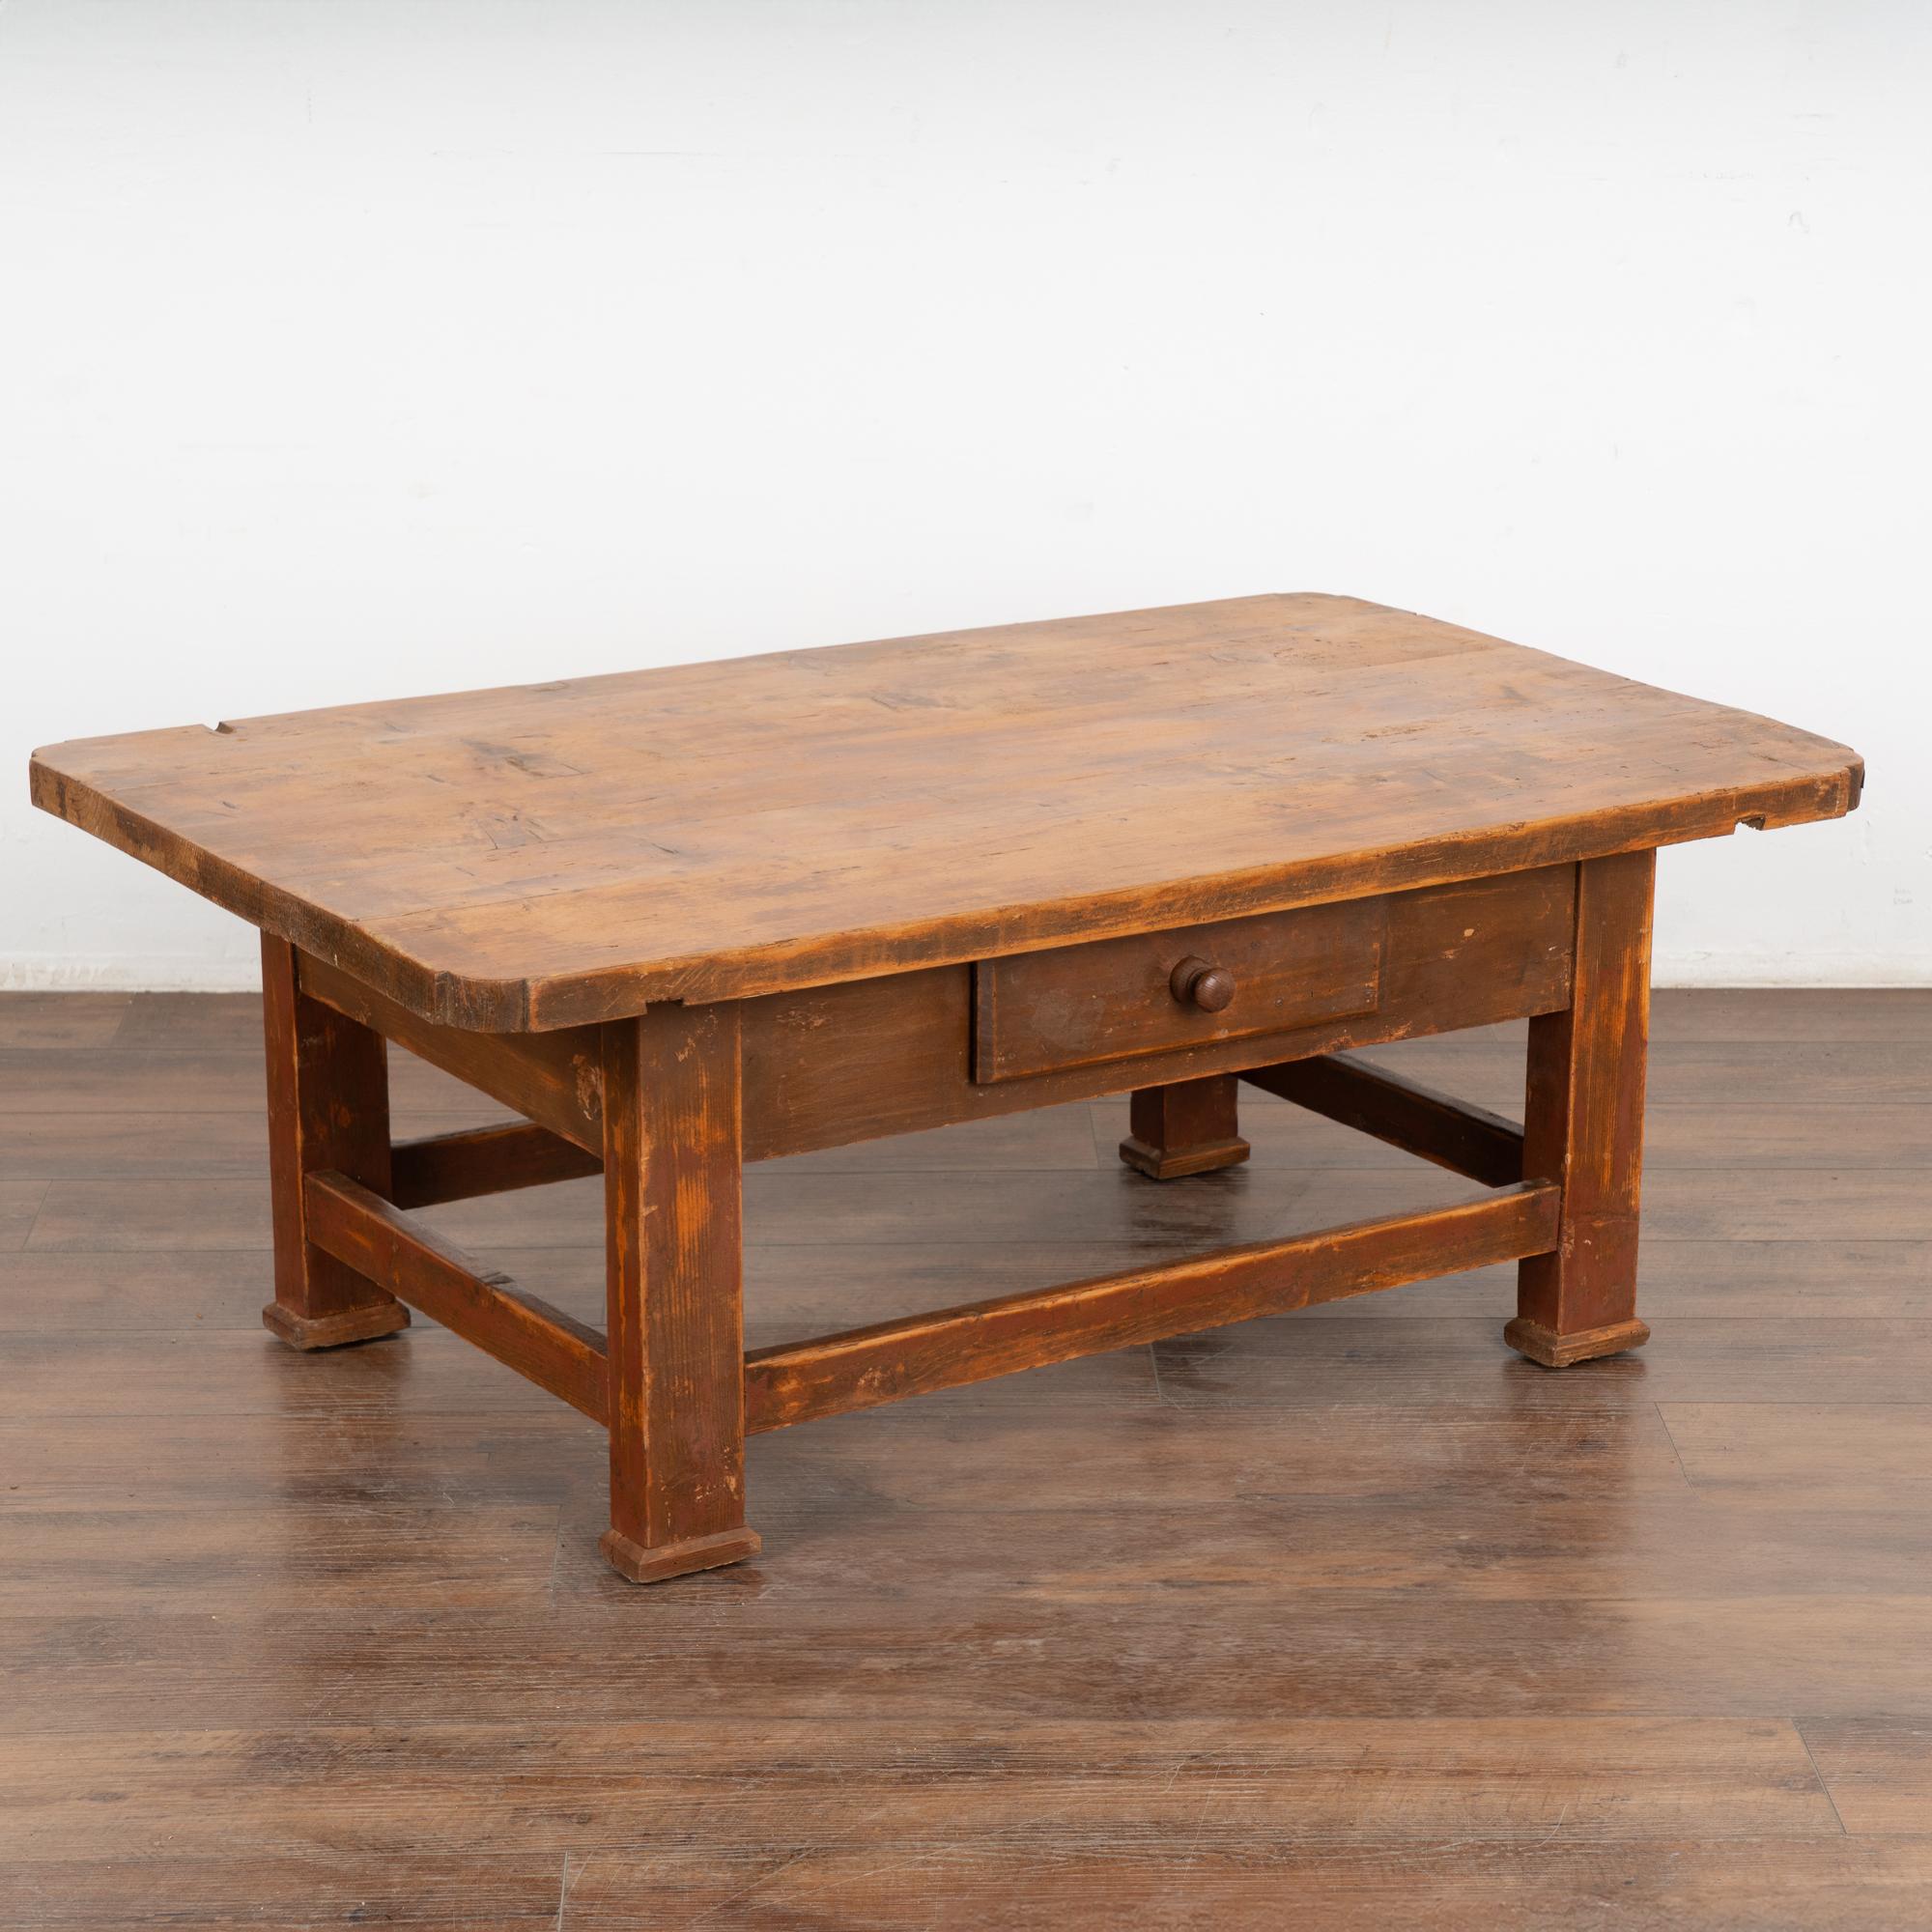 Farmhouse charm meets modern functionality in this pine coffee table from Europe. The original brown/brick paint has been distressed and worn down to reveal the natural pine below.
Every nick, scratch and gouge add to the character and appeal of